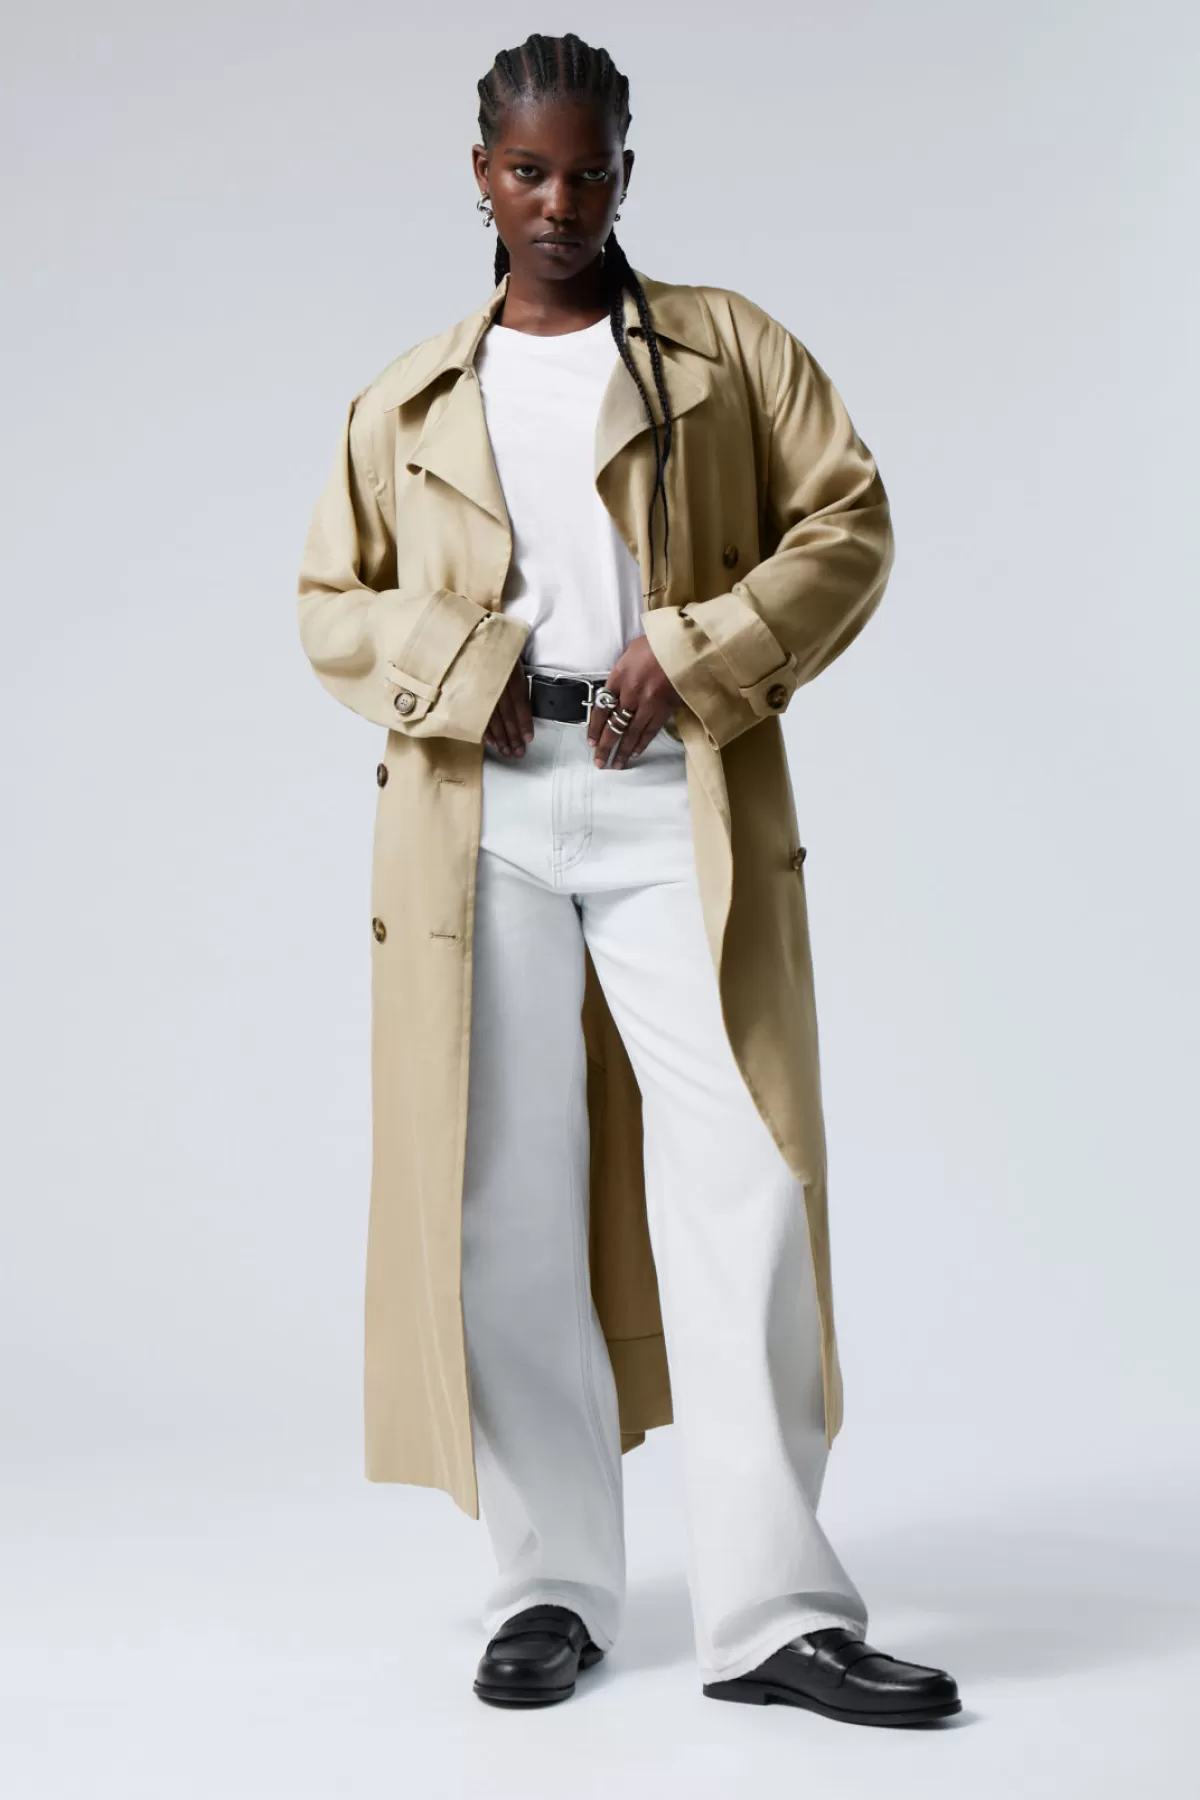 Weekday Evelyn Relaxed Lyocell Trench Coat Beige Hot